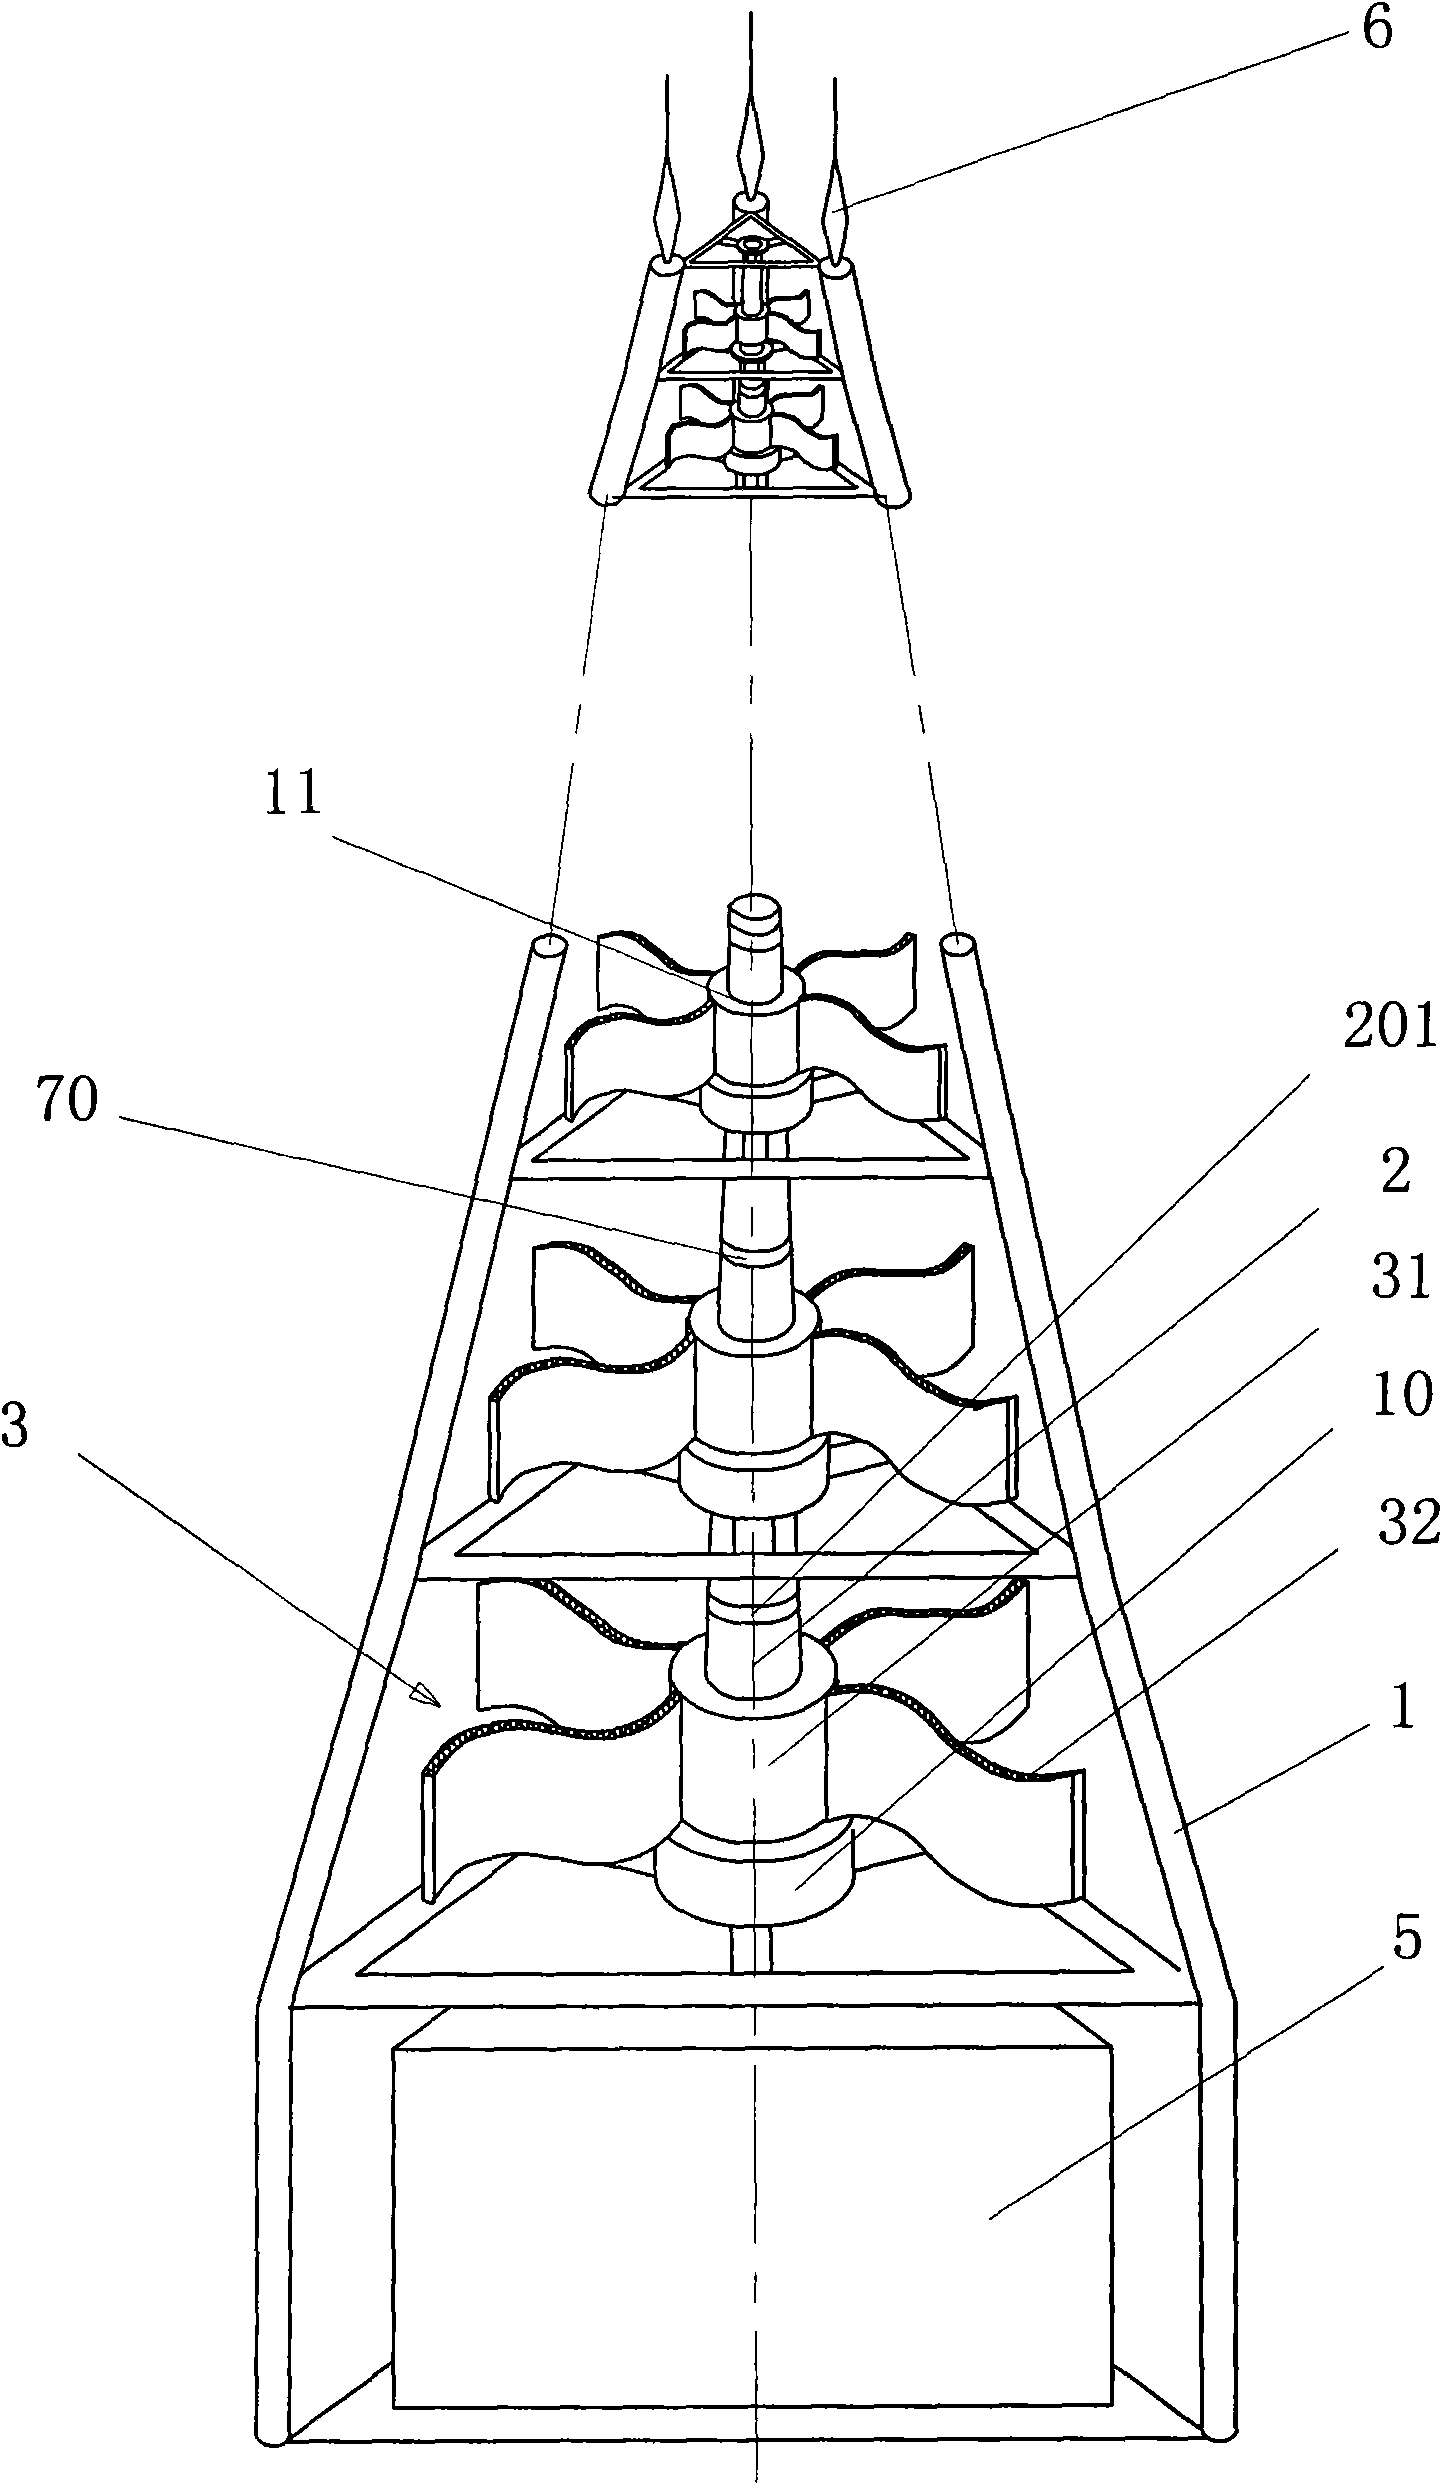 Multi-stage impeller wind-driven generator